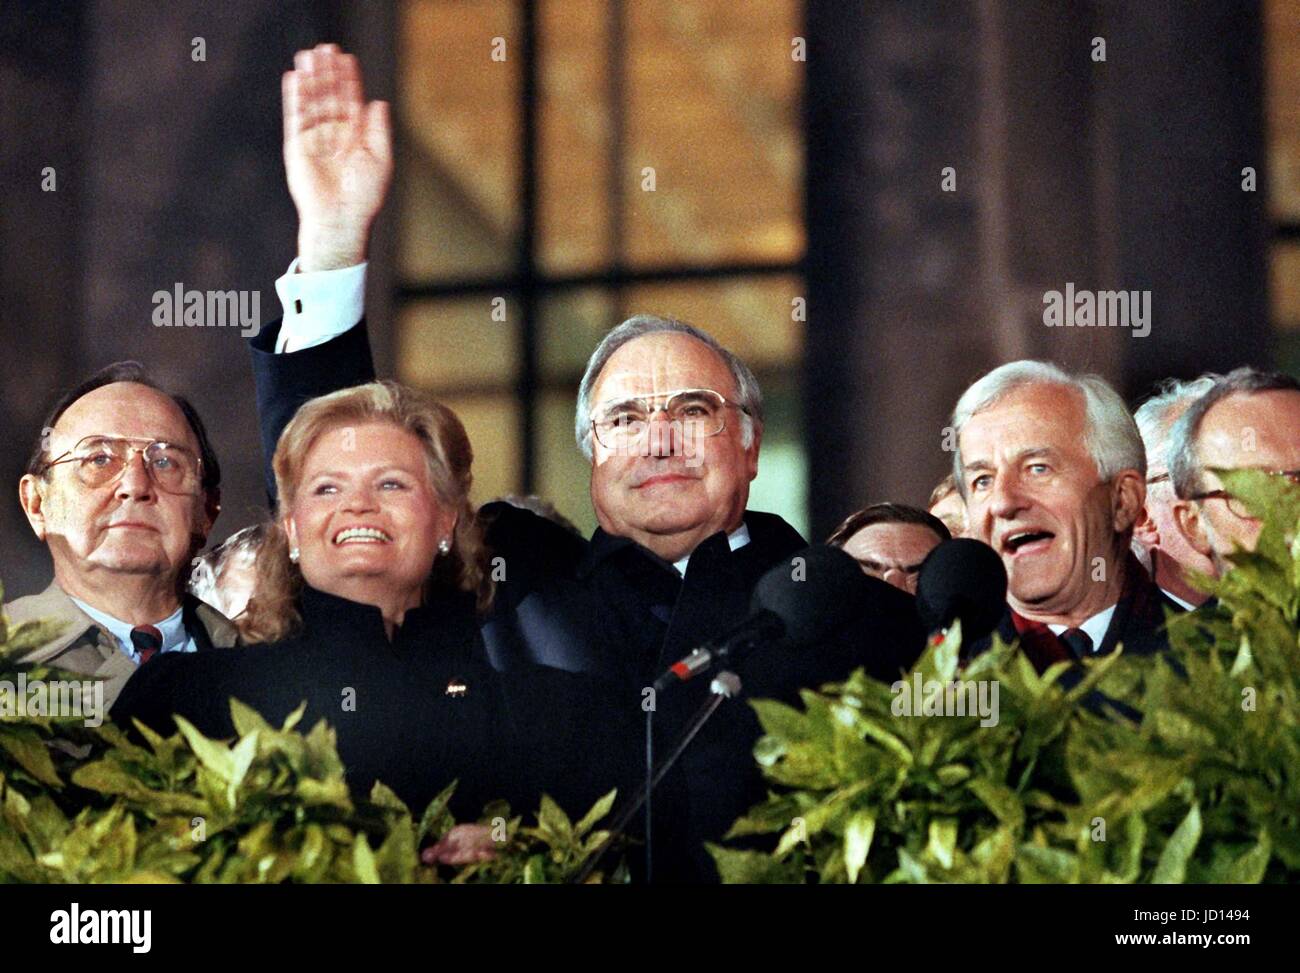 dpatop - ARCHIVE - An imaged dated 3 October 1990 shows (L-R) the then German foreign minister Hans-Dietrich Genscher (FDP), Hannelore Kohl, German chancellor Helmut Kohl (CDU), the German president Richard von Weizsaecker and Lothar de Maiziere, the last premier of German Democratic Republic (DDR) outside Reichstag in Berlin, Germany. The former German chancellor Helmut Kohl has died at the age of 87. The news was shared with the German Press Agency by Kohl's lawyer Holthoff-Pfoertner. Photo: Wolfgang Kumm/dpa Stock Photo